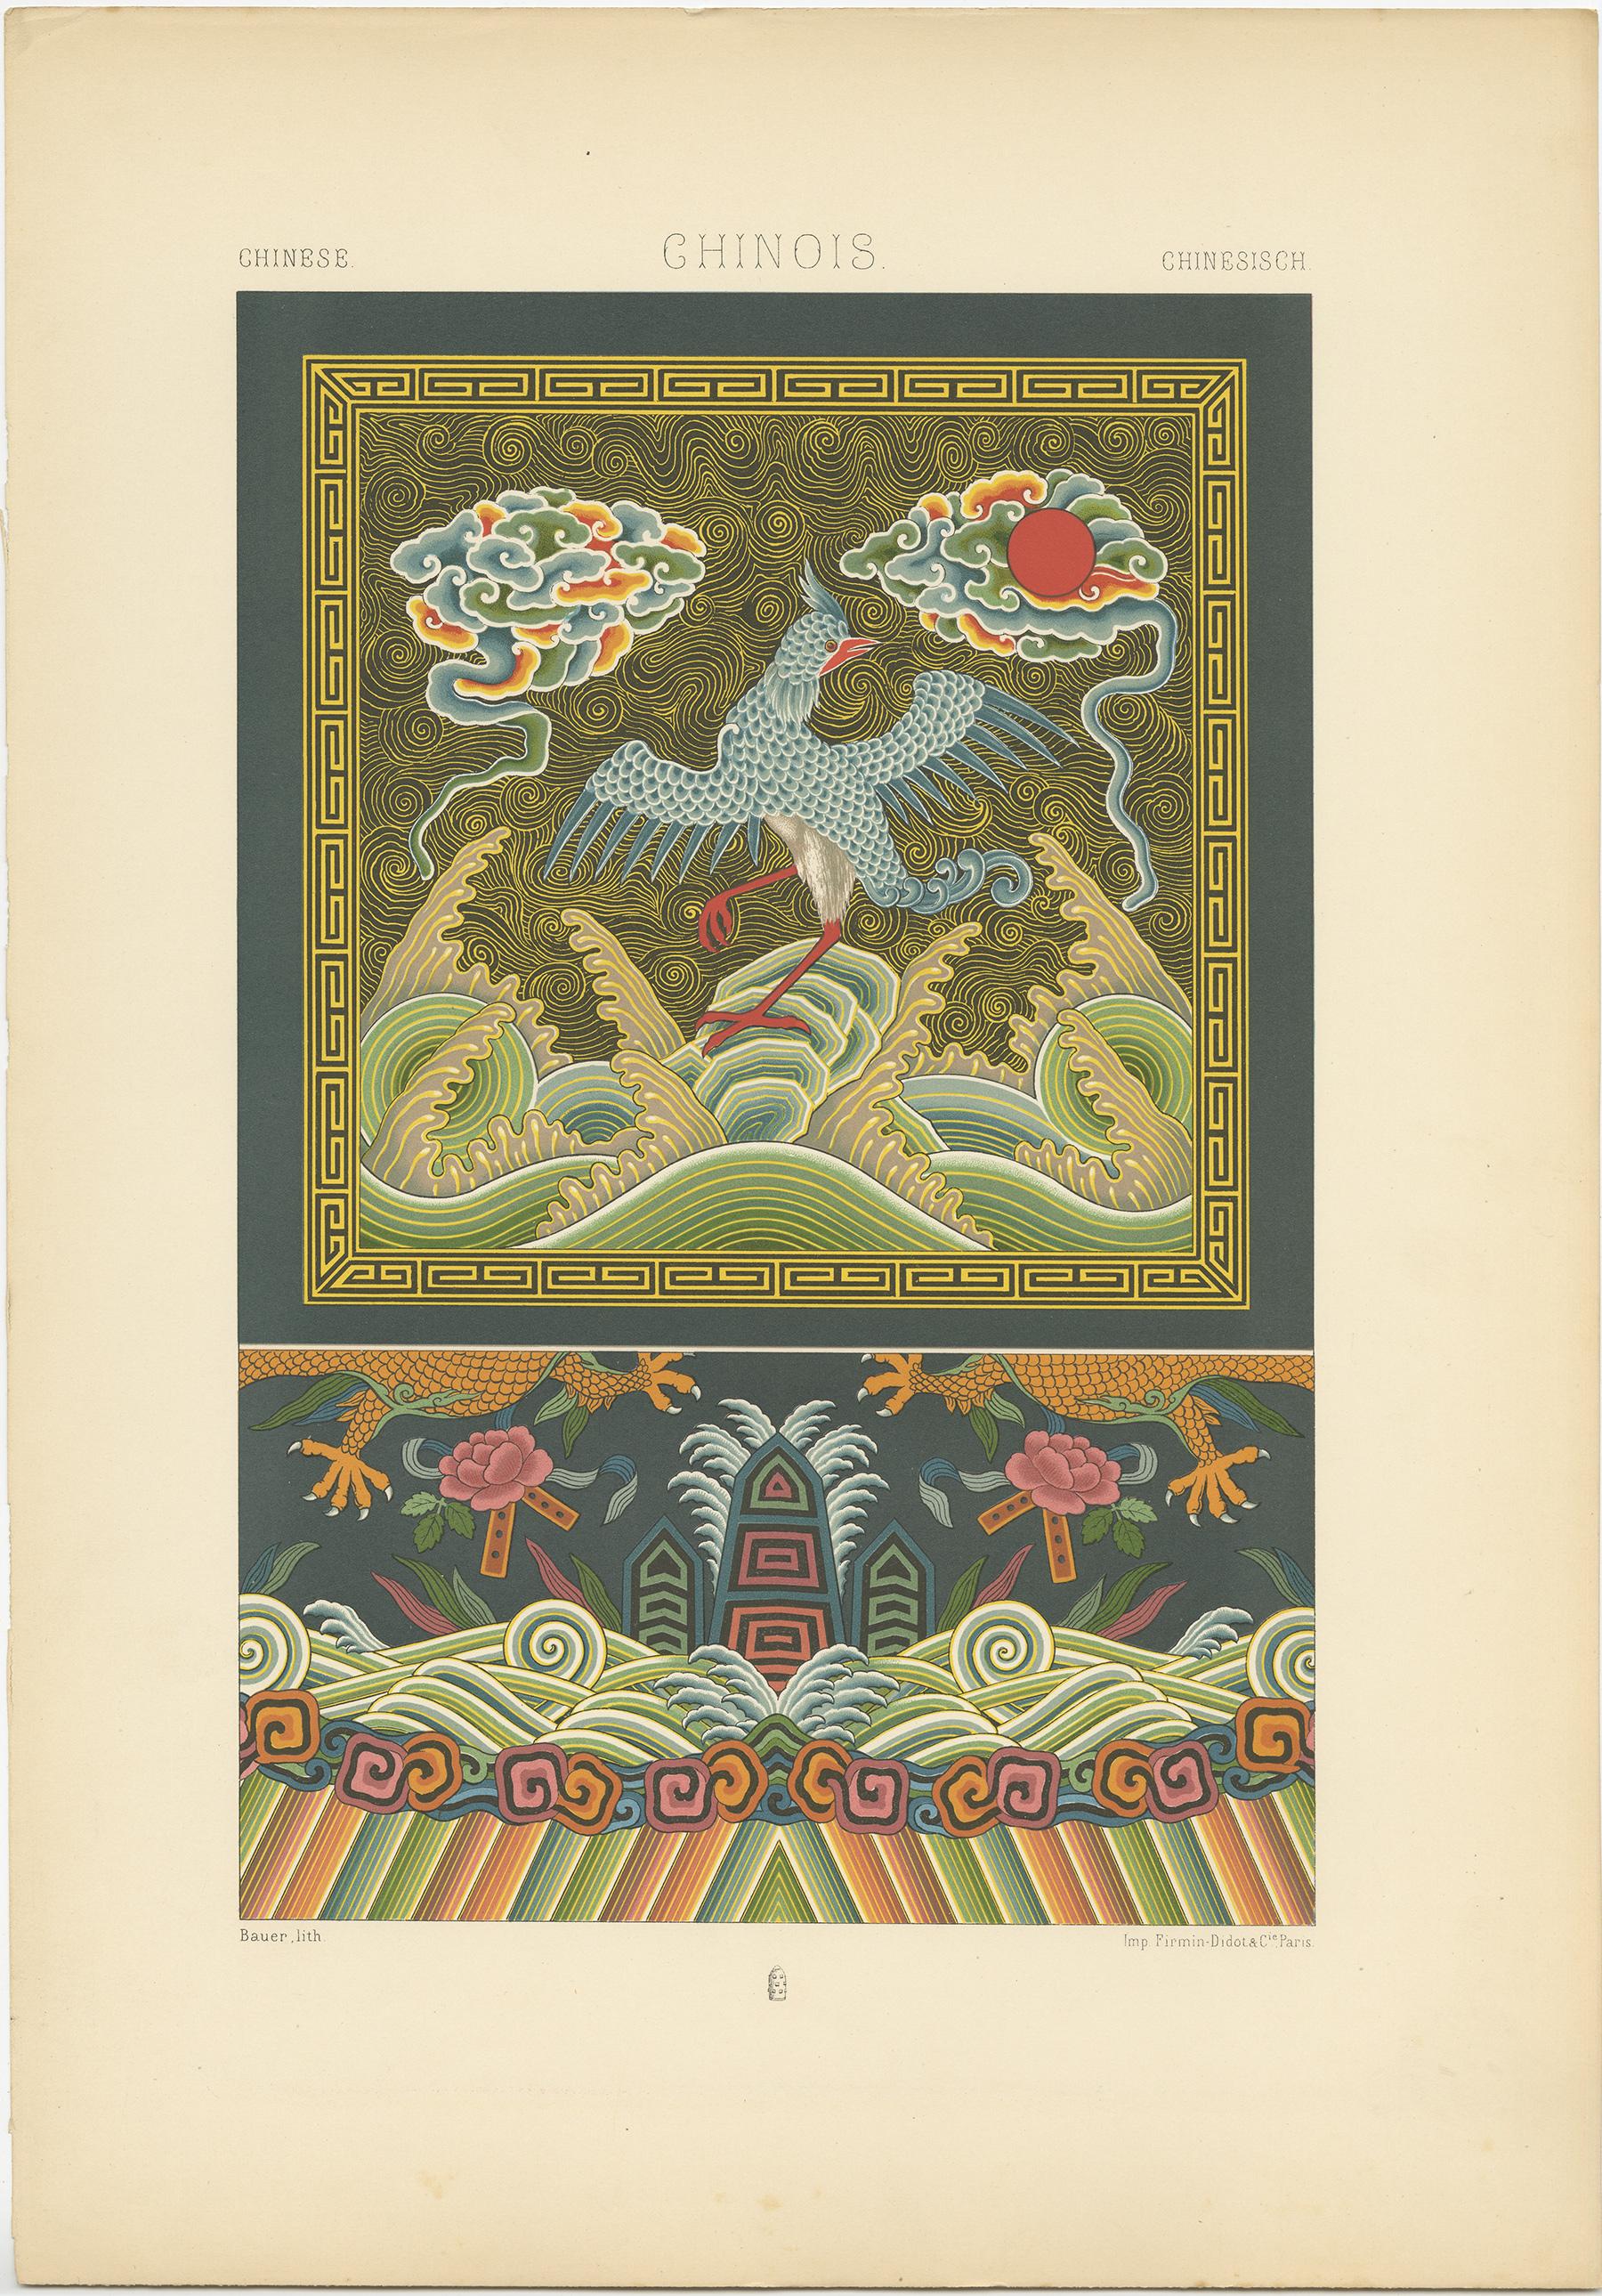 Antique print titled 'Chinese - Chinois - Chinesisch'. Chromolithograph of Chinese embroideries (mandarin badge and detail from a court robe) ornaments. This print originates from 'l'Ornement Polychrome' by Auguste Racinet. Published circa 1890.